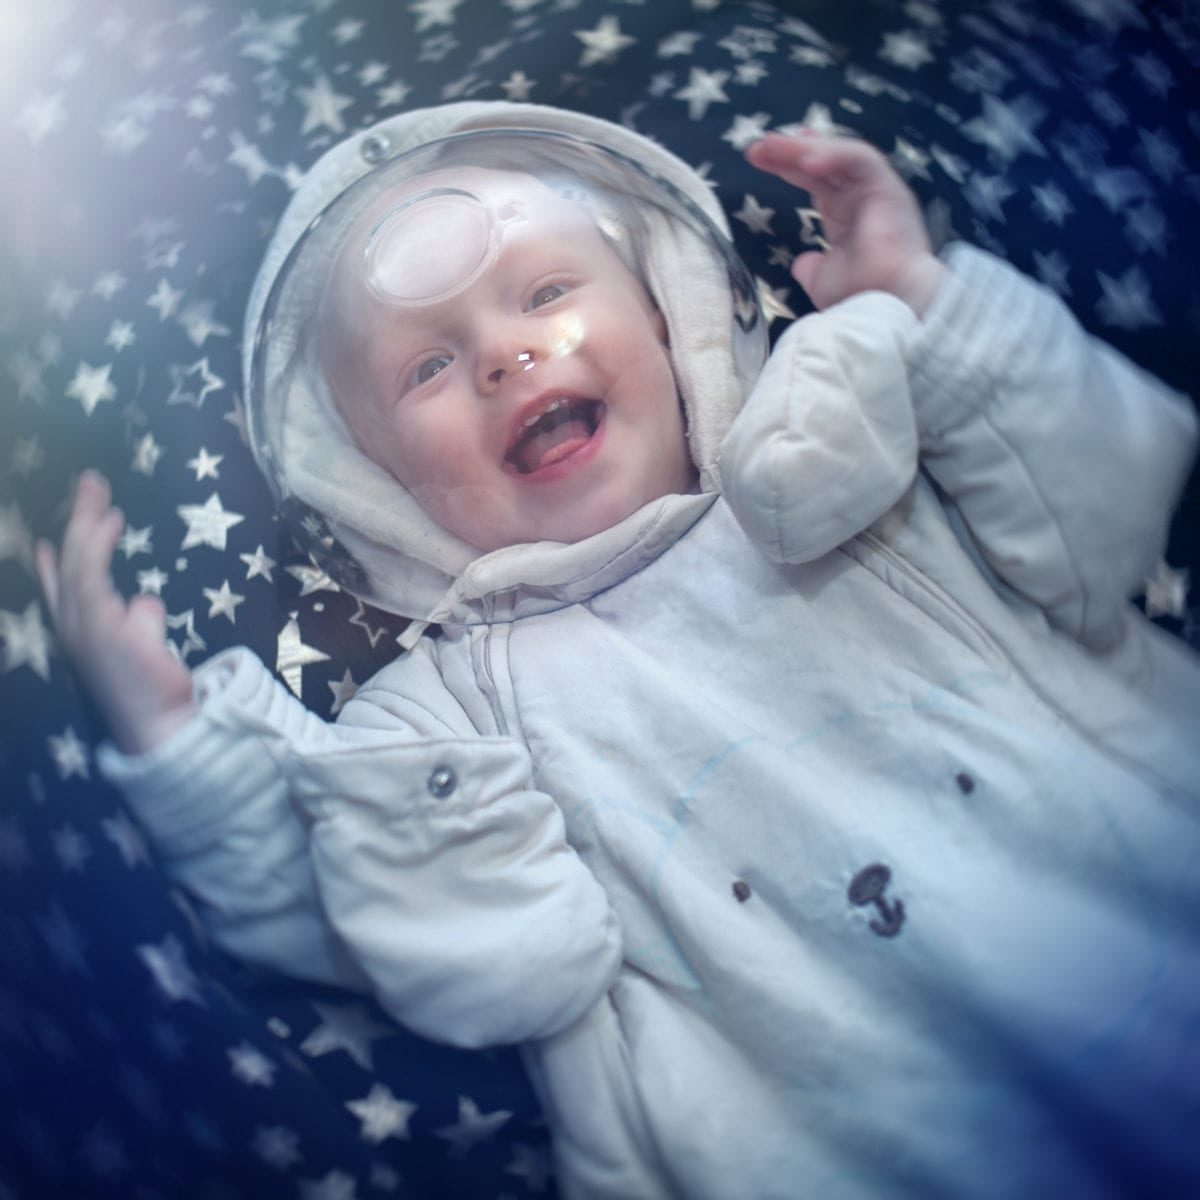 75+ zodiac-inspired baby names for astrology-obsessed parents | we turn to the stars to discover the best zodiac-inspired baby names for girls and boys. a due date is all you will need to find a fitting option for your child.